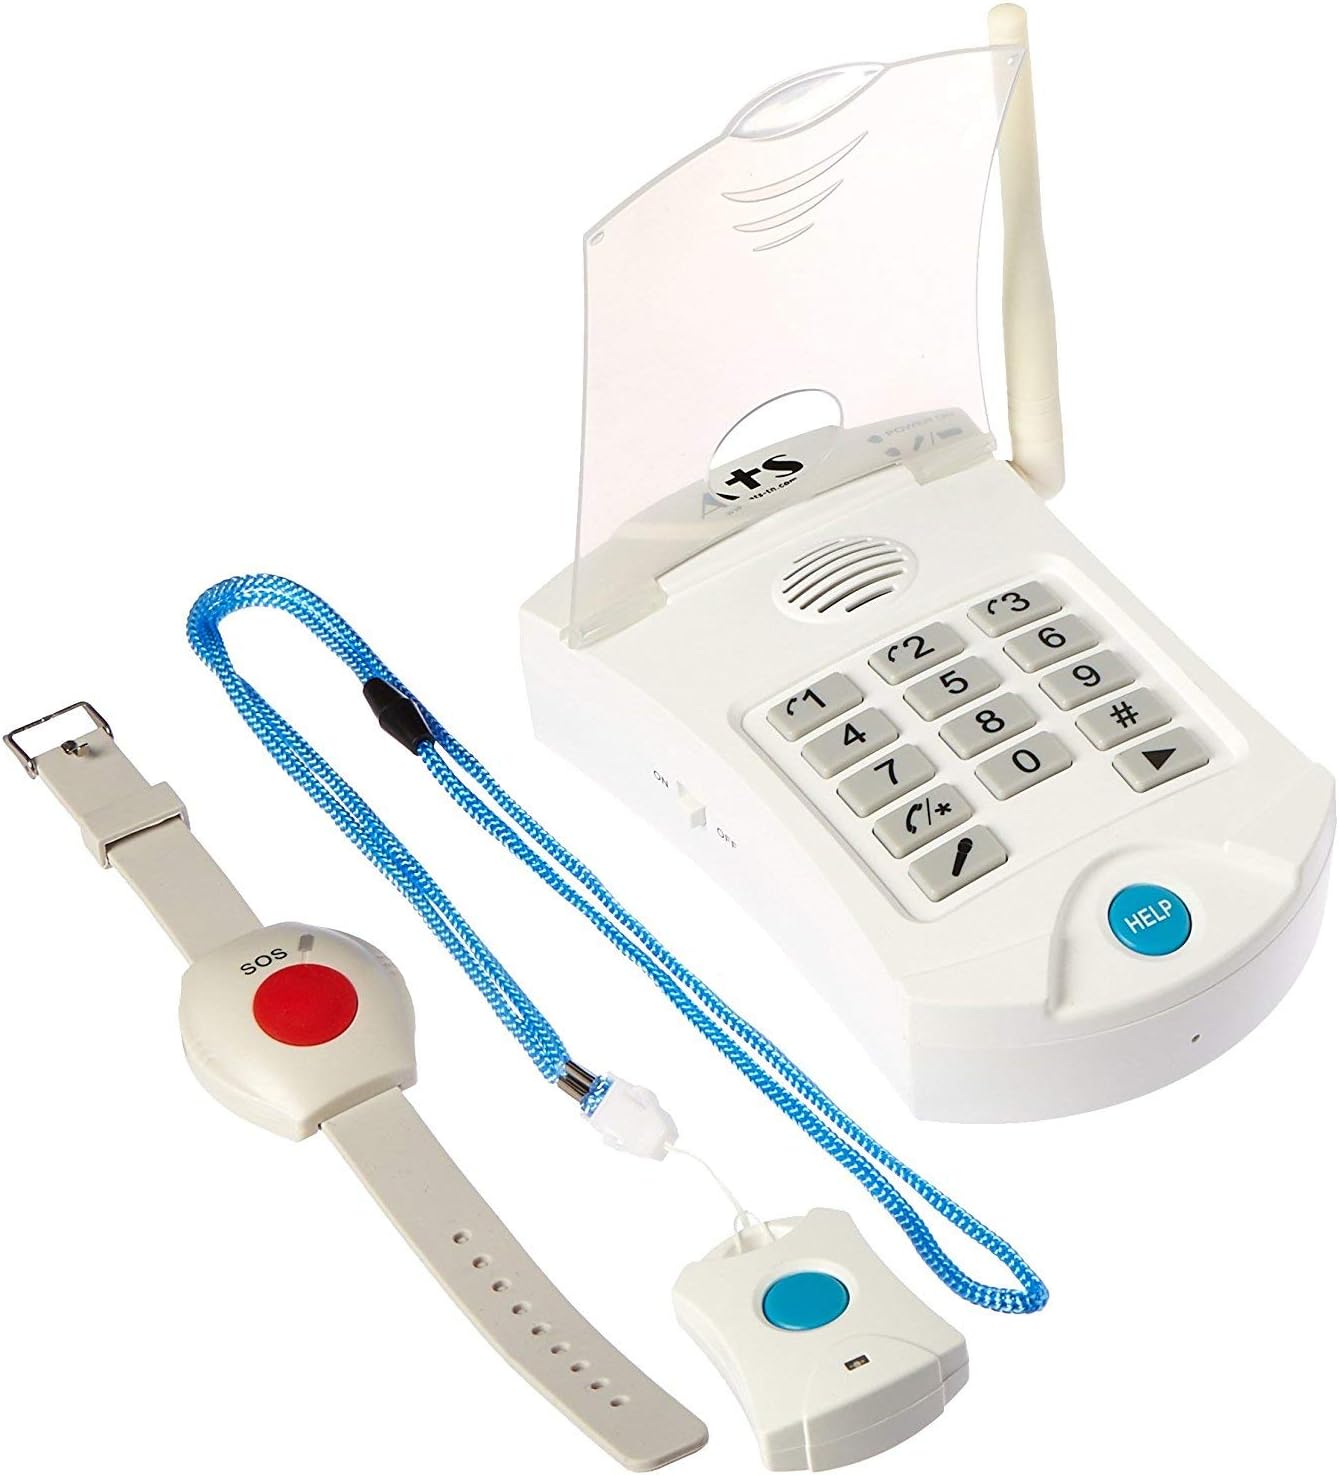 HELP Dialer 700 with Necklace and Wrist Panic Buttons [...]